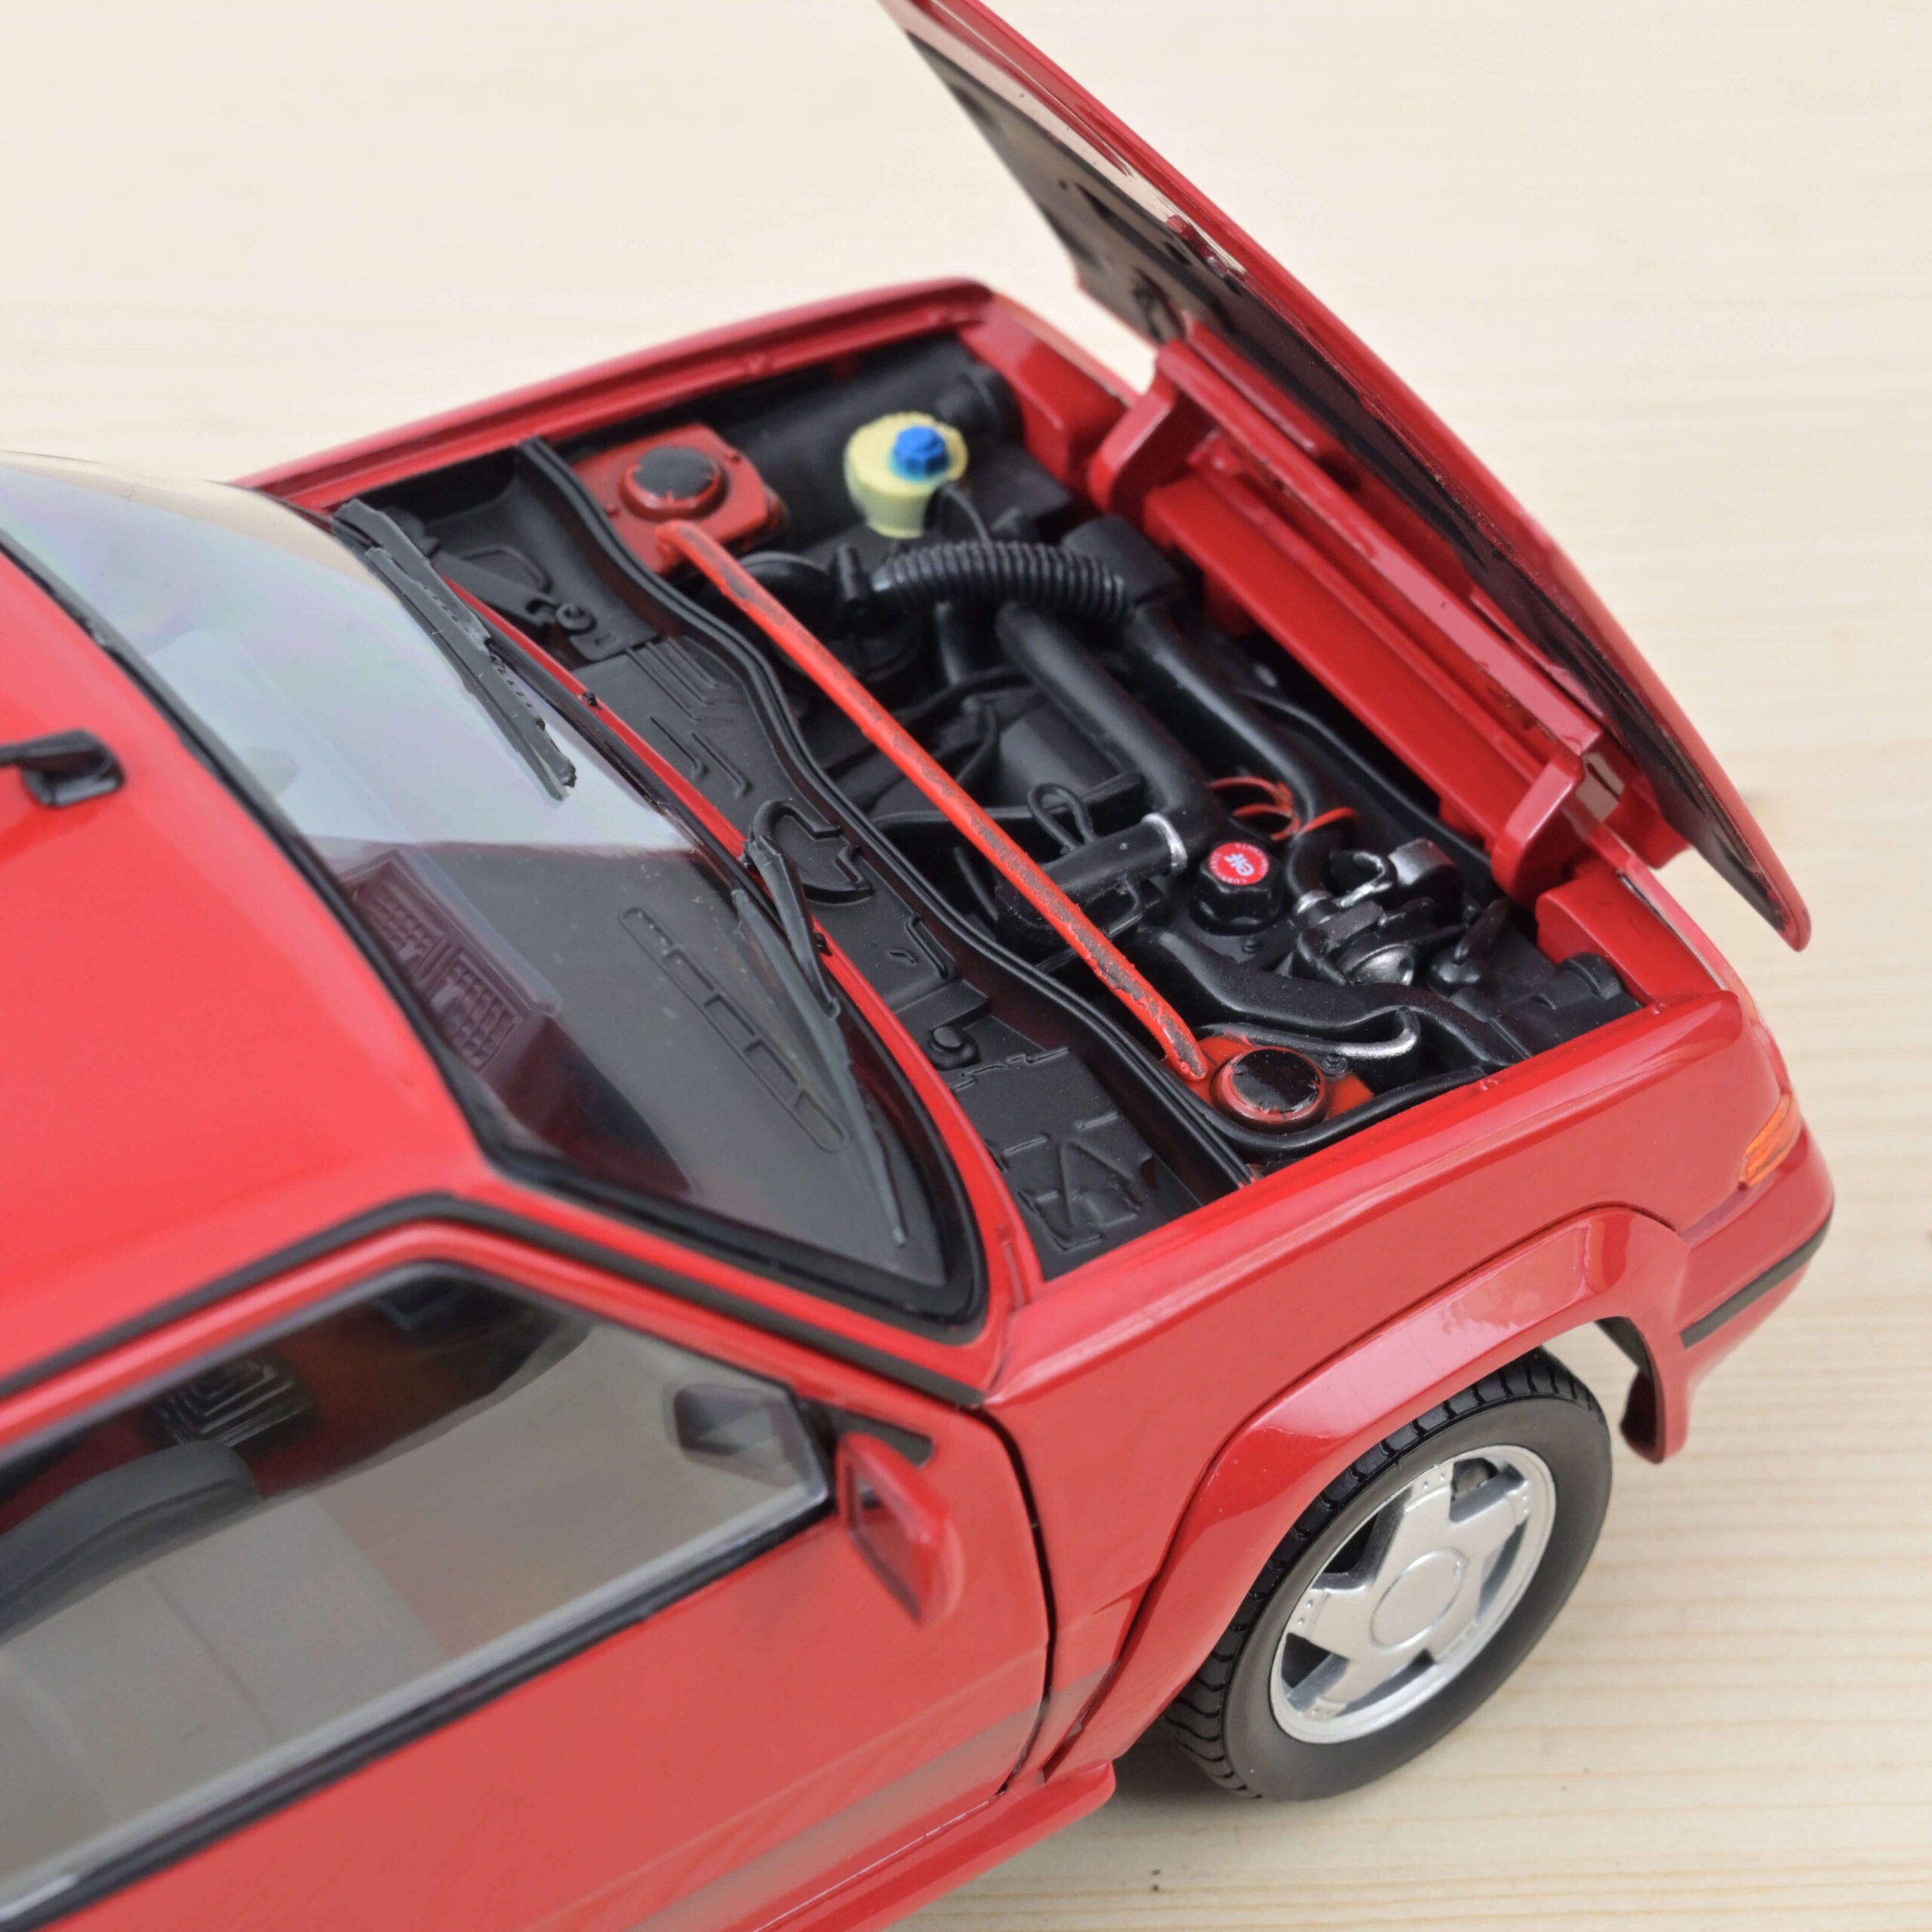 Renault Supercinq GT Turbo 1989 – Red